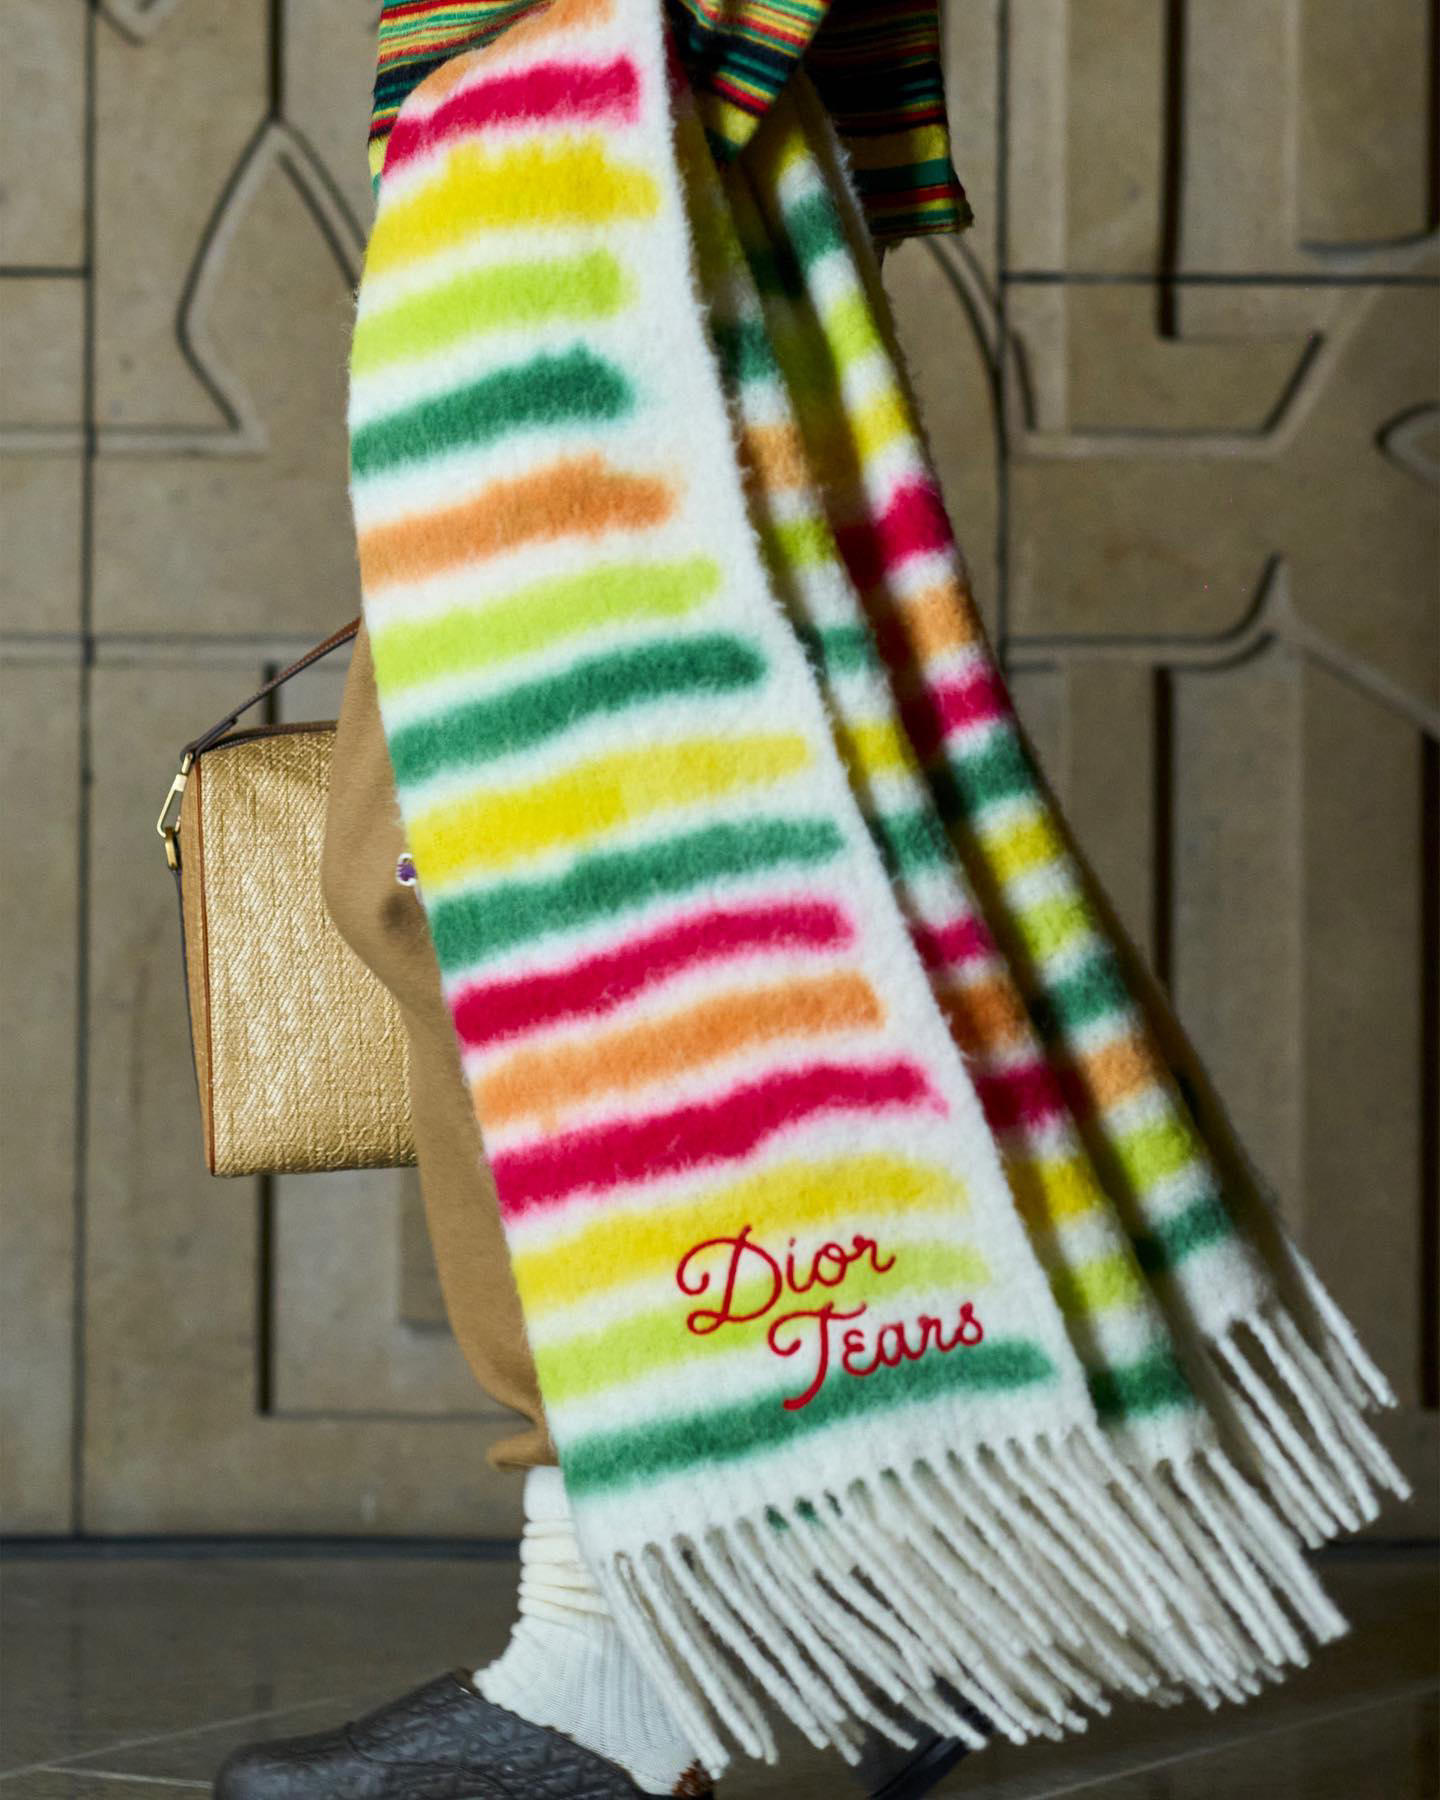 image  1 Dior Official - Painterly striped scarves and crocheted hats, and the logoed embroideries of the cot